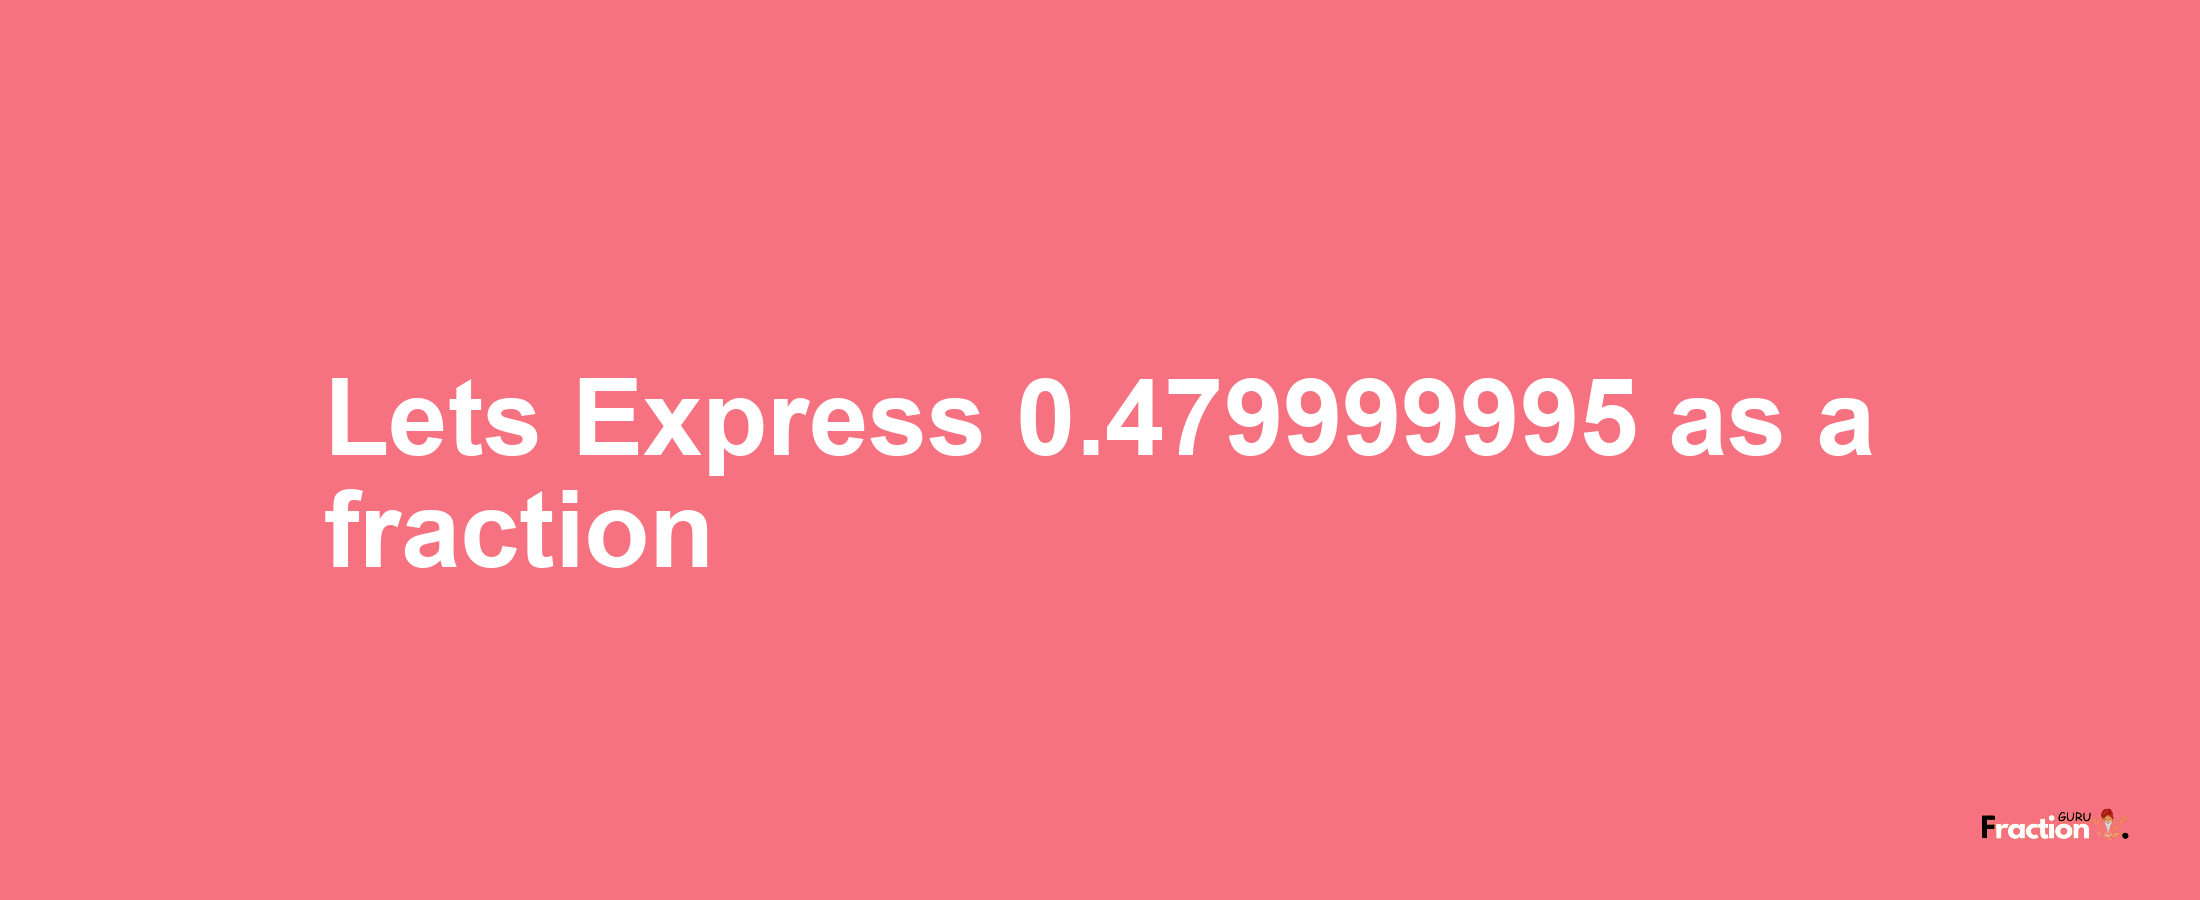 Lets Express 0.479999995 as afraction